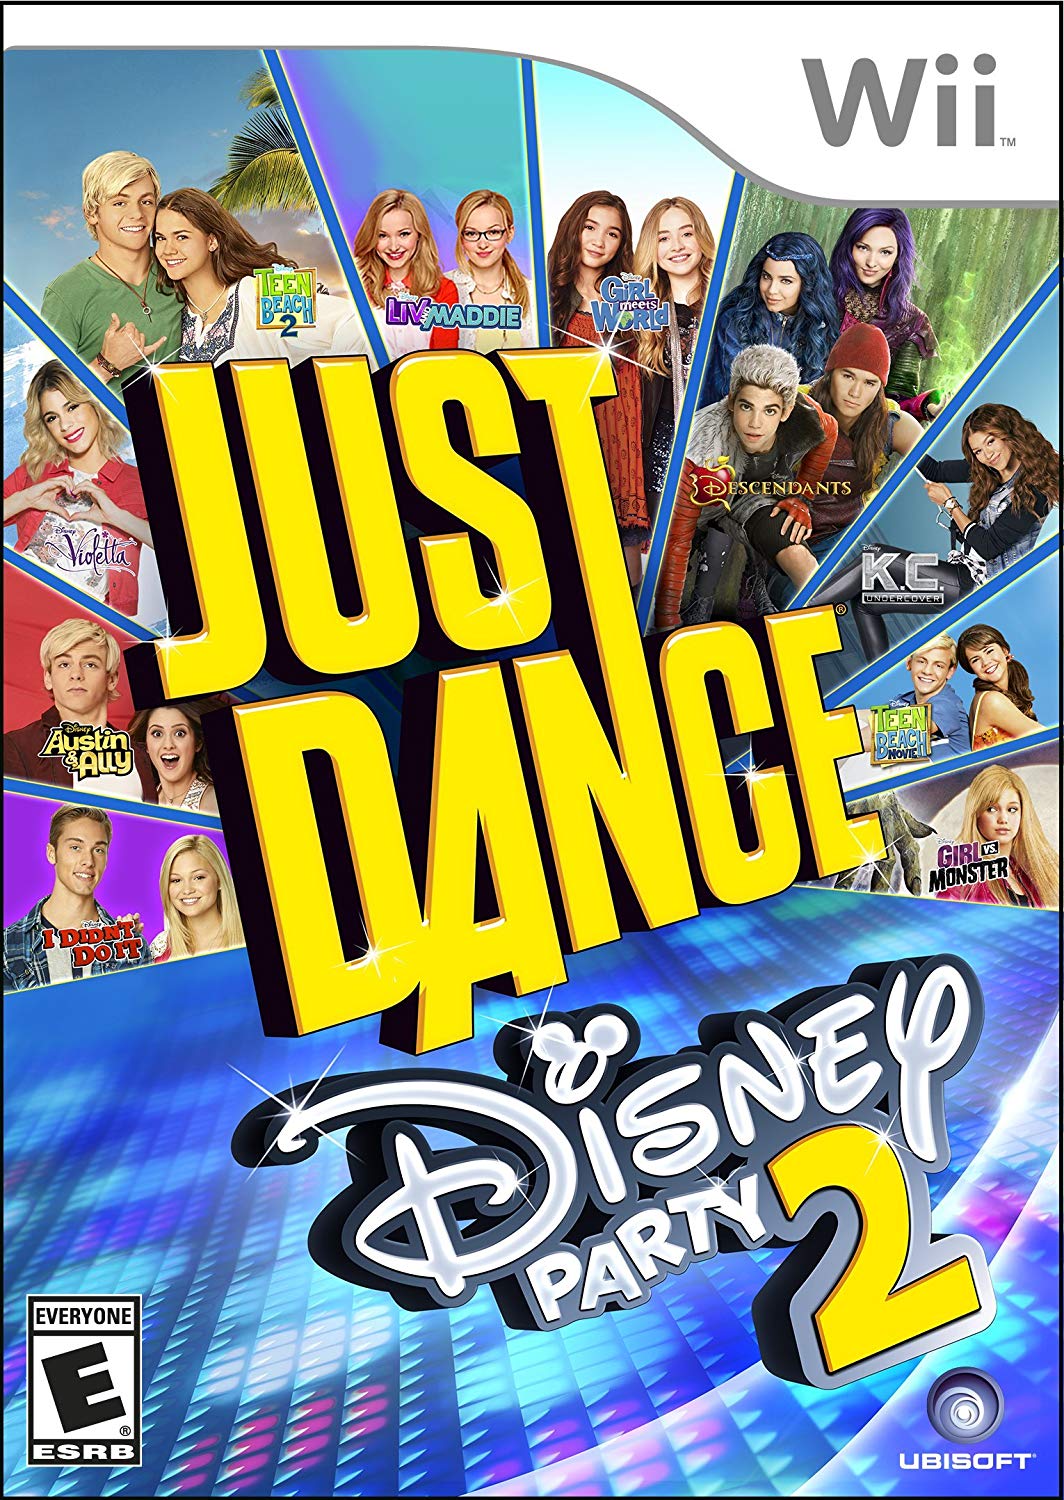 WII: JUST DANCE DISNEY PARTY 2 (COMPLETE) - Click Image to Close